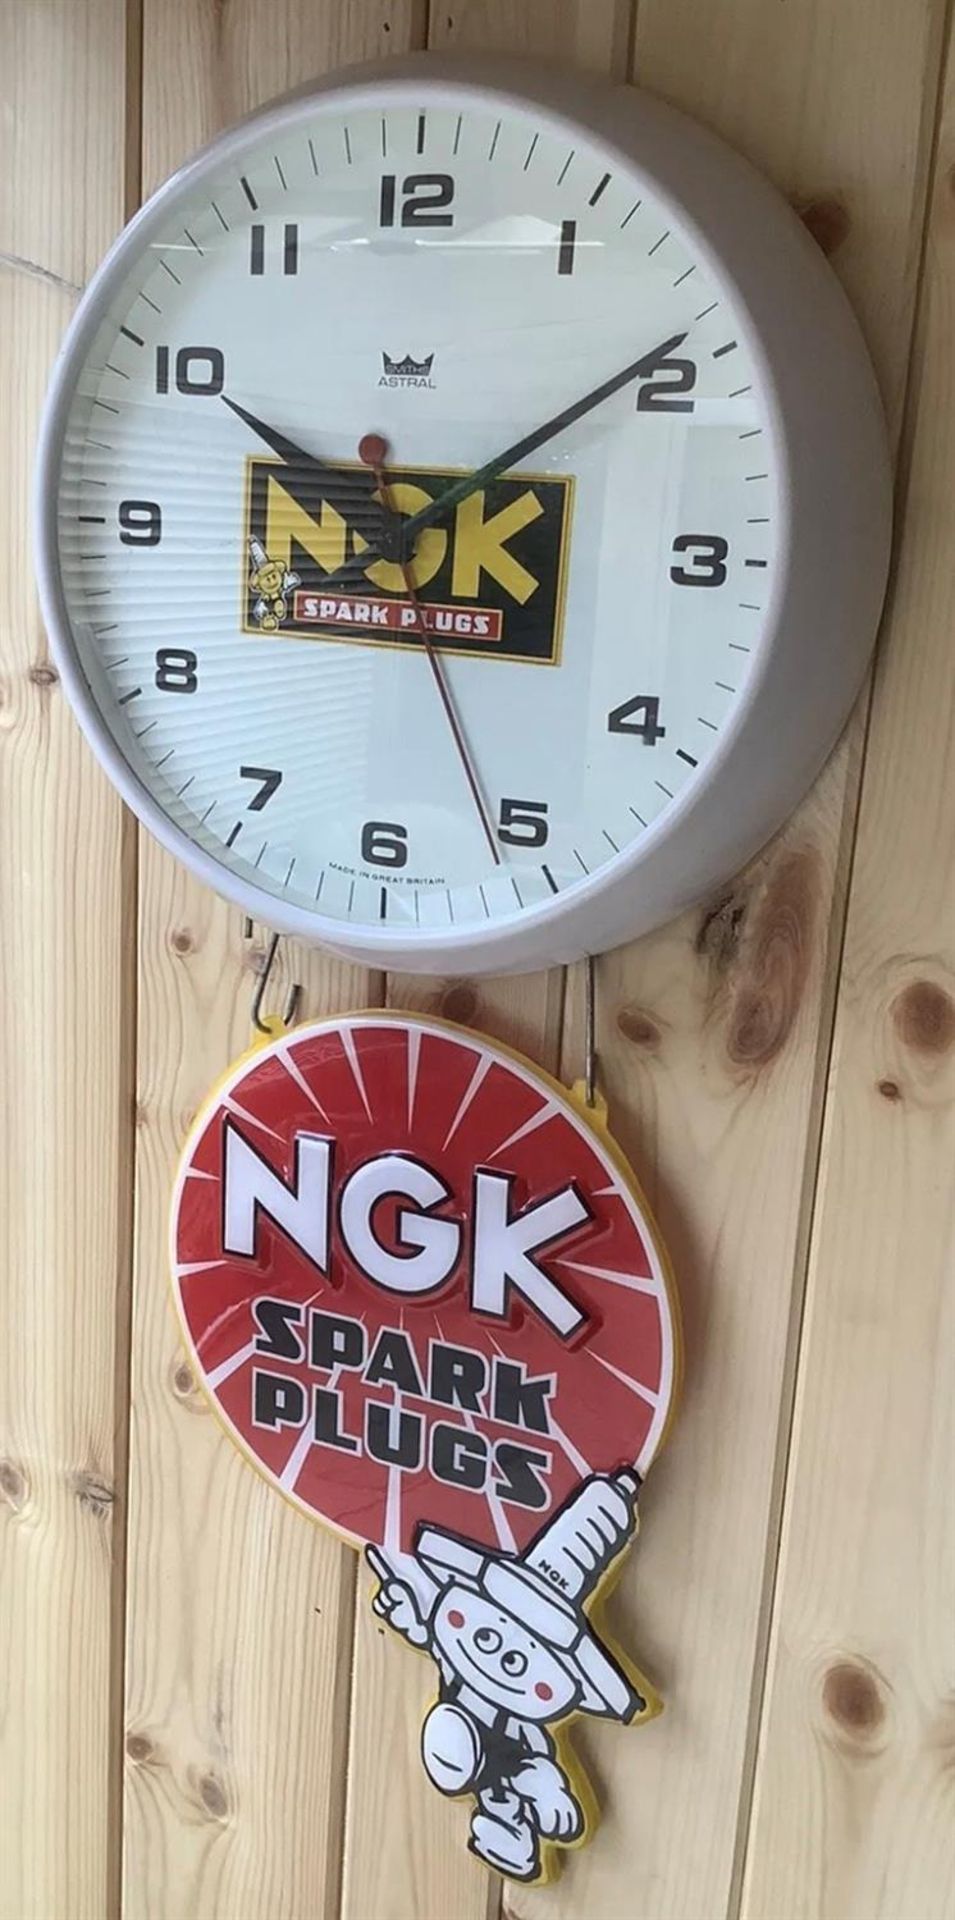 A Rare, NGK Spark Plugs, 14" Smiths Astral Dial Clock - Image 7 of 10